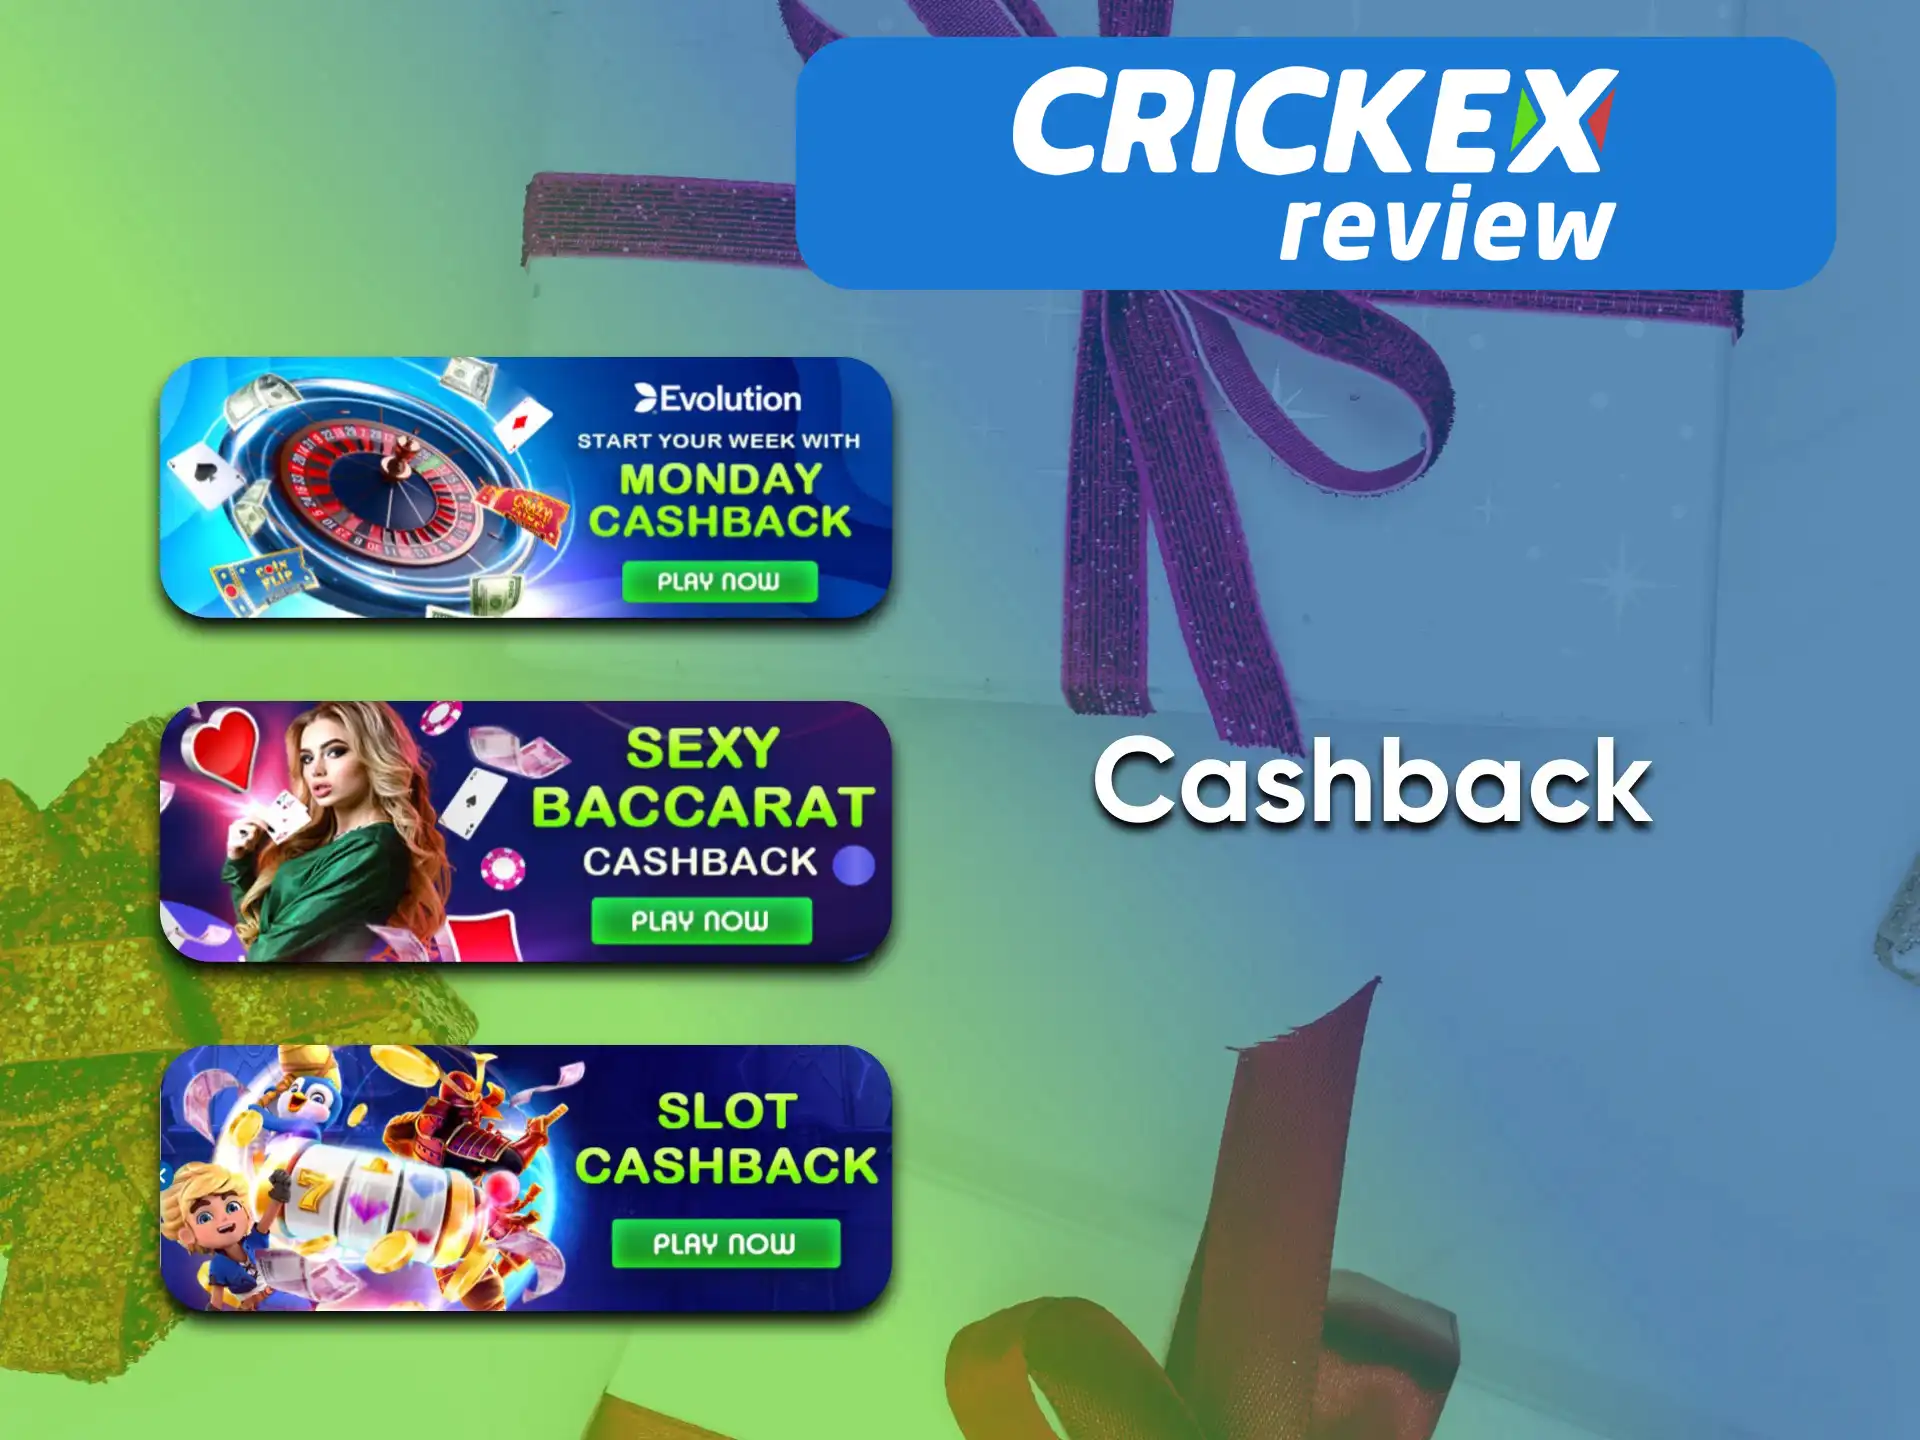 Using Crickex you get back part of the money spent.